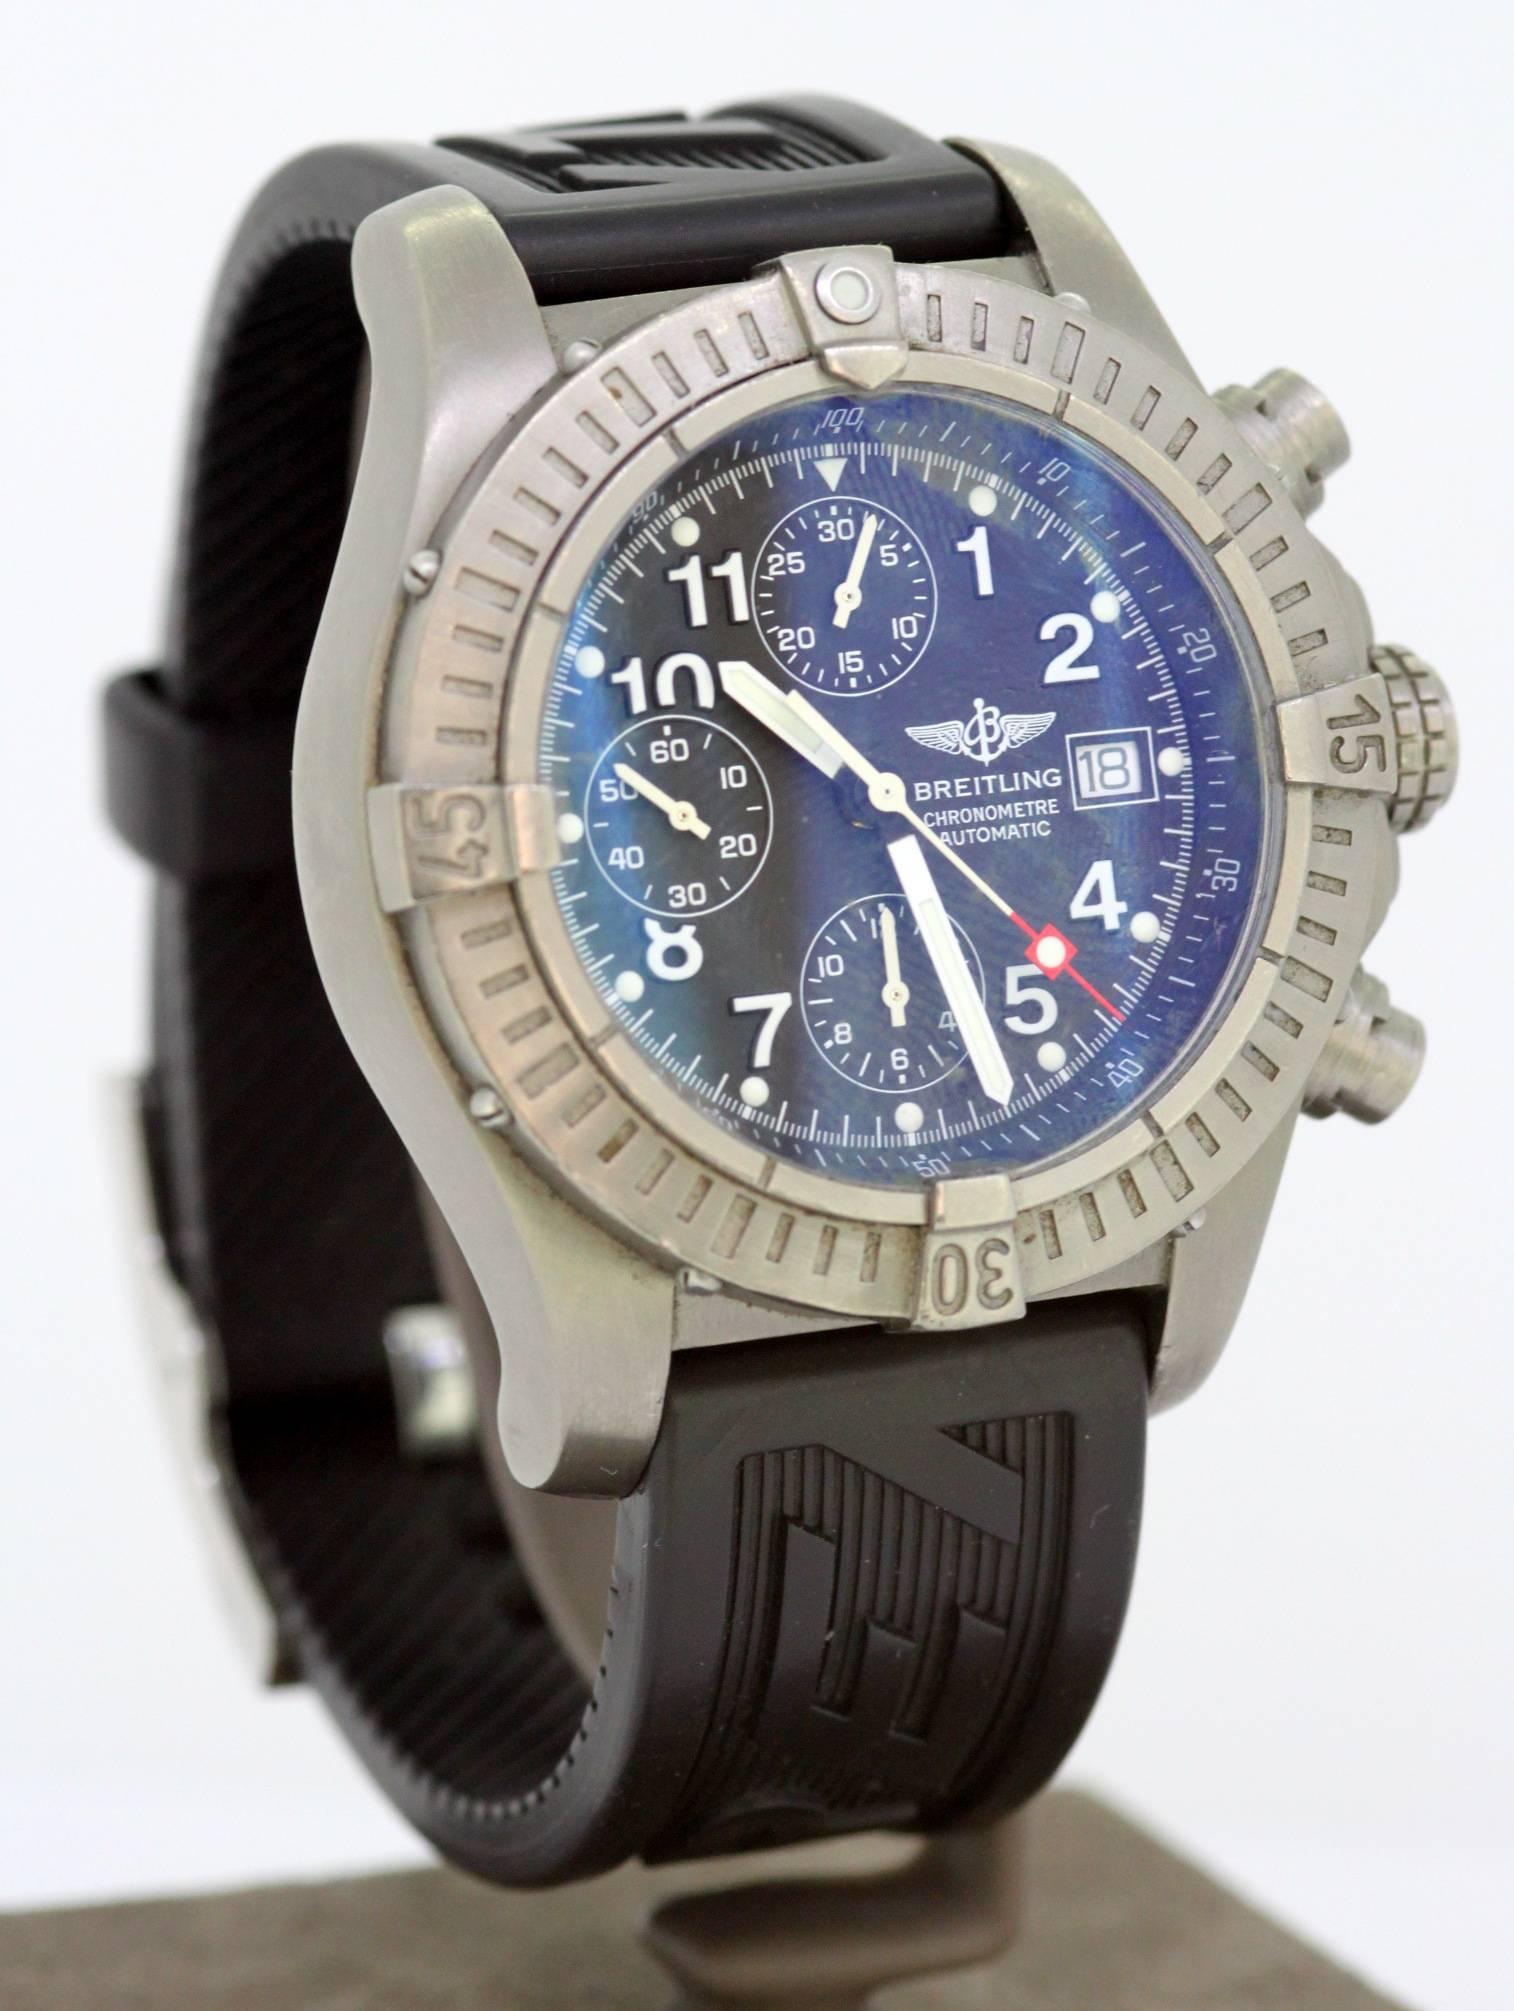 Breitling - Avenger - e13360 - Men - 2000-2010

A great all-rounder, this Breitling Chrono Avenger is supplied in Fine condition. Featuring a matte navy blue dial, with white luminous hands, three sub-dials with arabic numeral hour markers and a